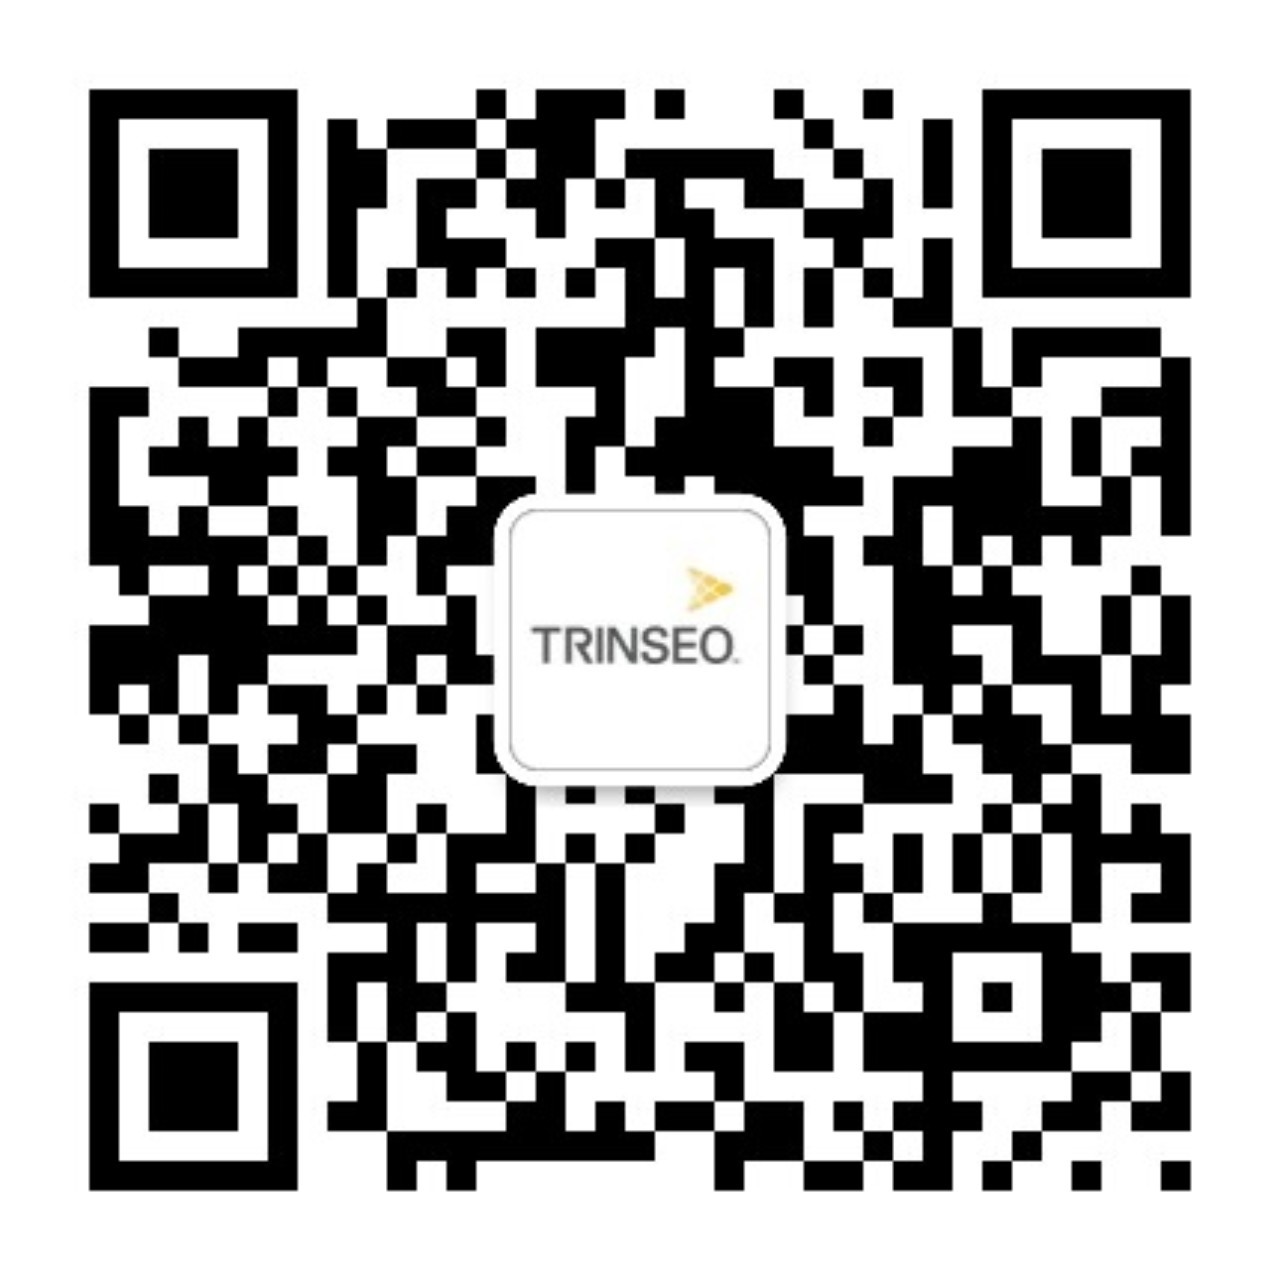 QR Code to follow Trinseo on WeChat